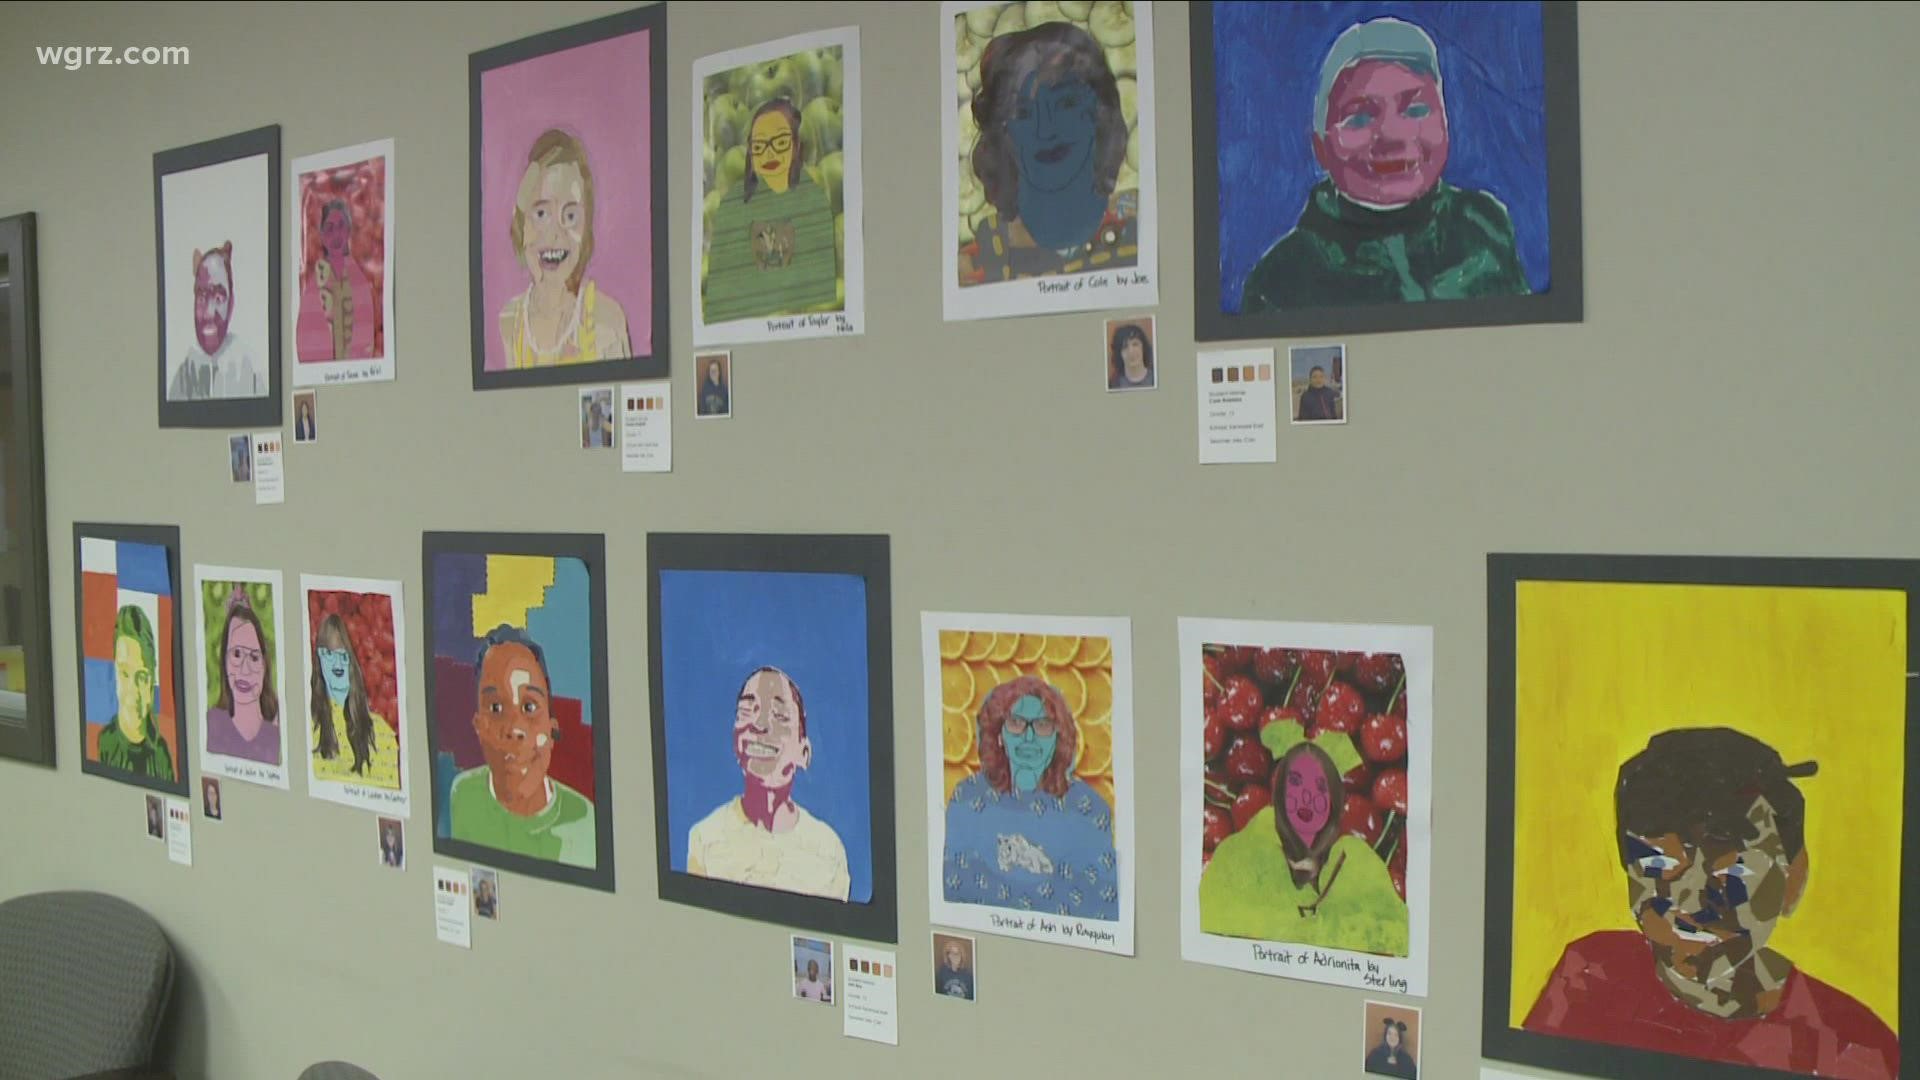 The "Love The Skin You're In" show features artwork that students contributed, inspired by artist Angelica Dass.